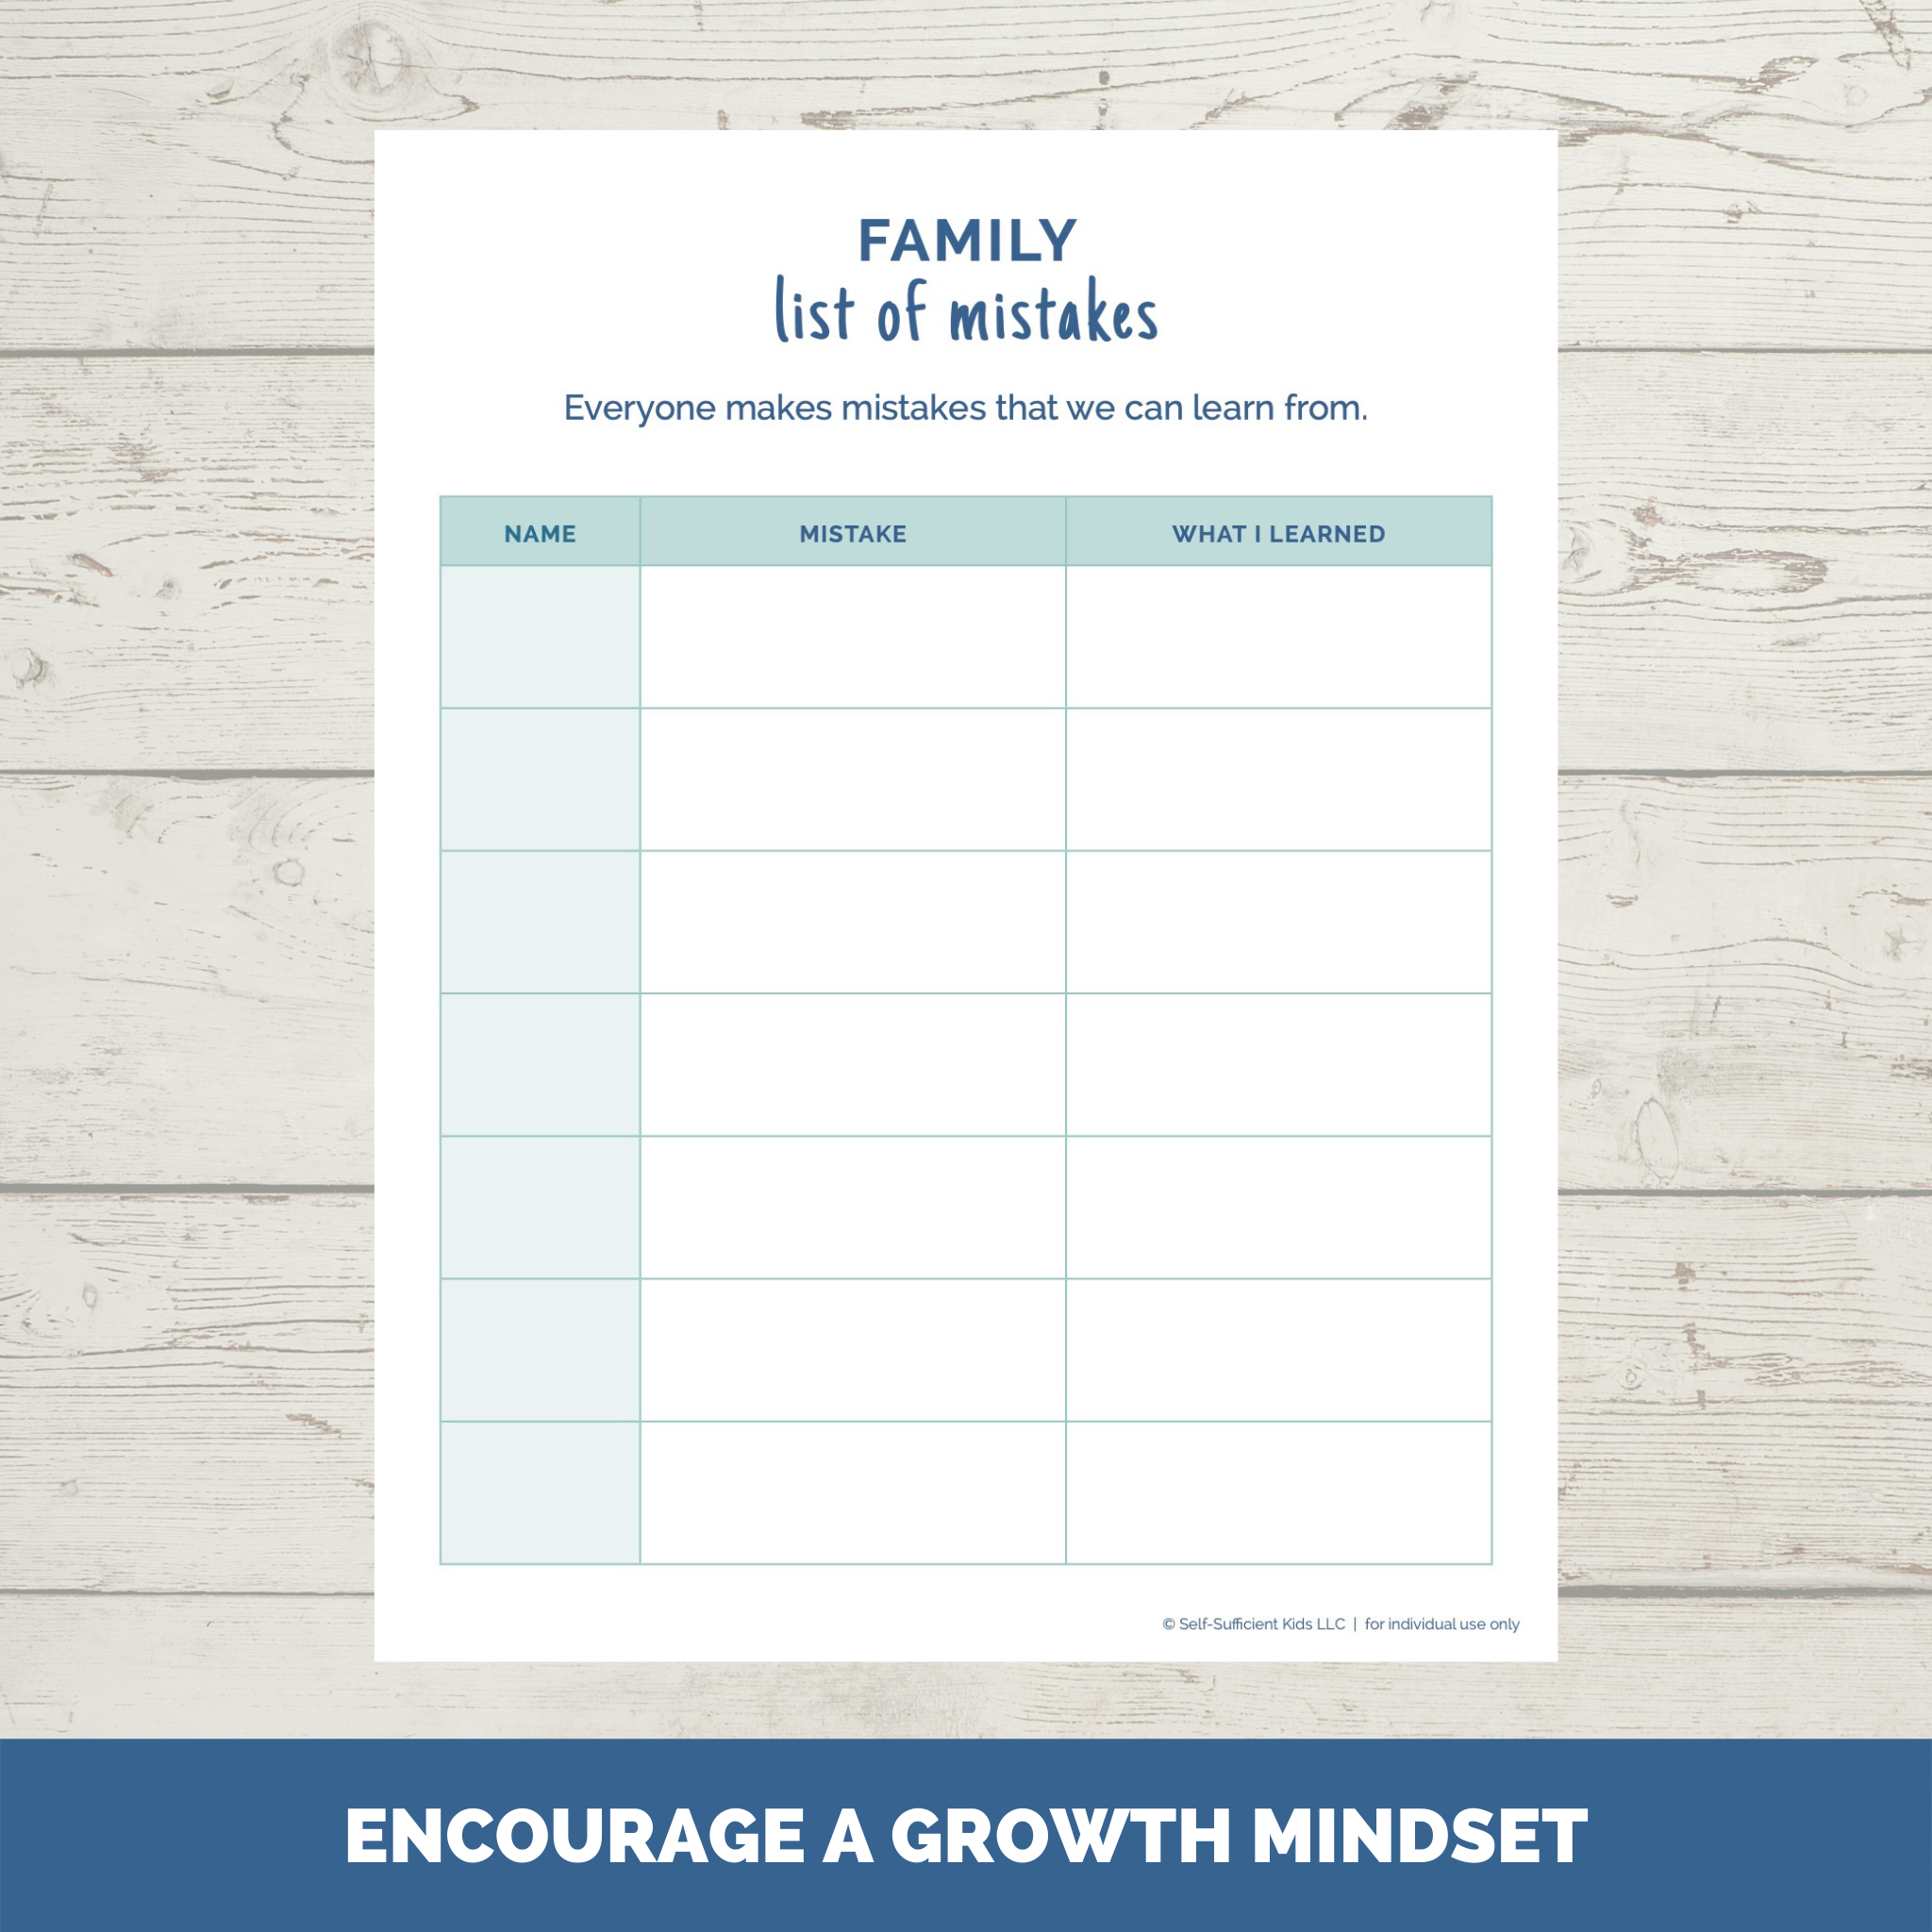 All-in-One Family Meeting Toolkit – Self-Sufficient Kids LLC